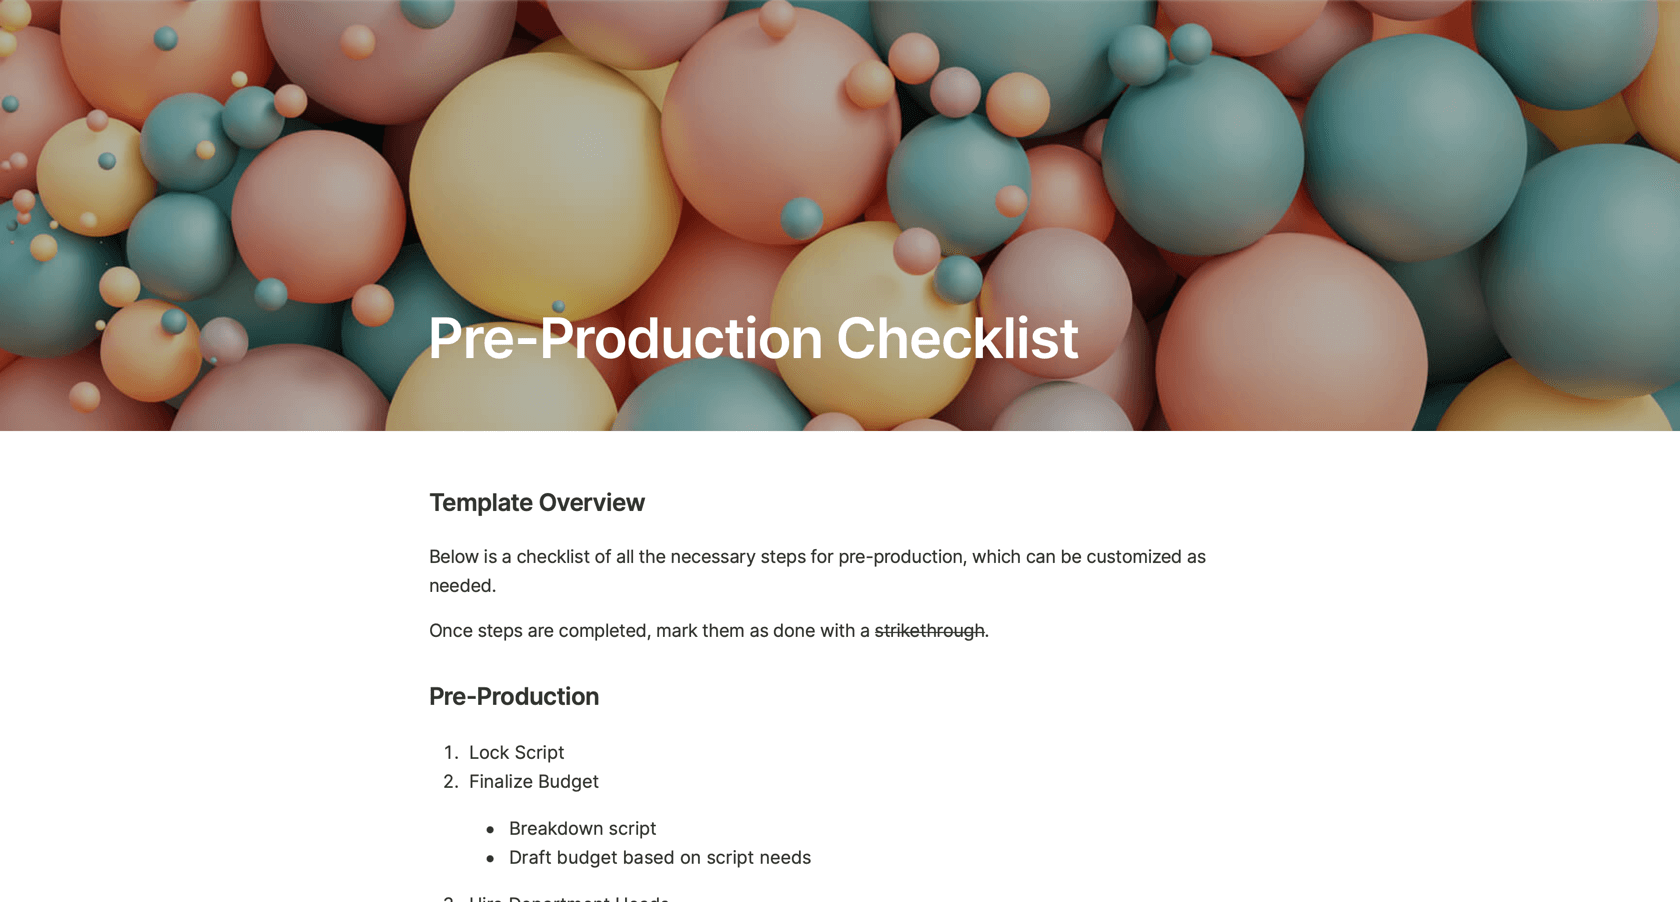 https://3389140.fs1.hubspotusercontent-na1.net/hubfs/3389140/Pre%20Production%20Checklist%20Template.png